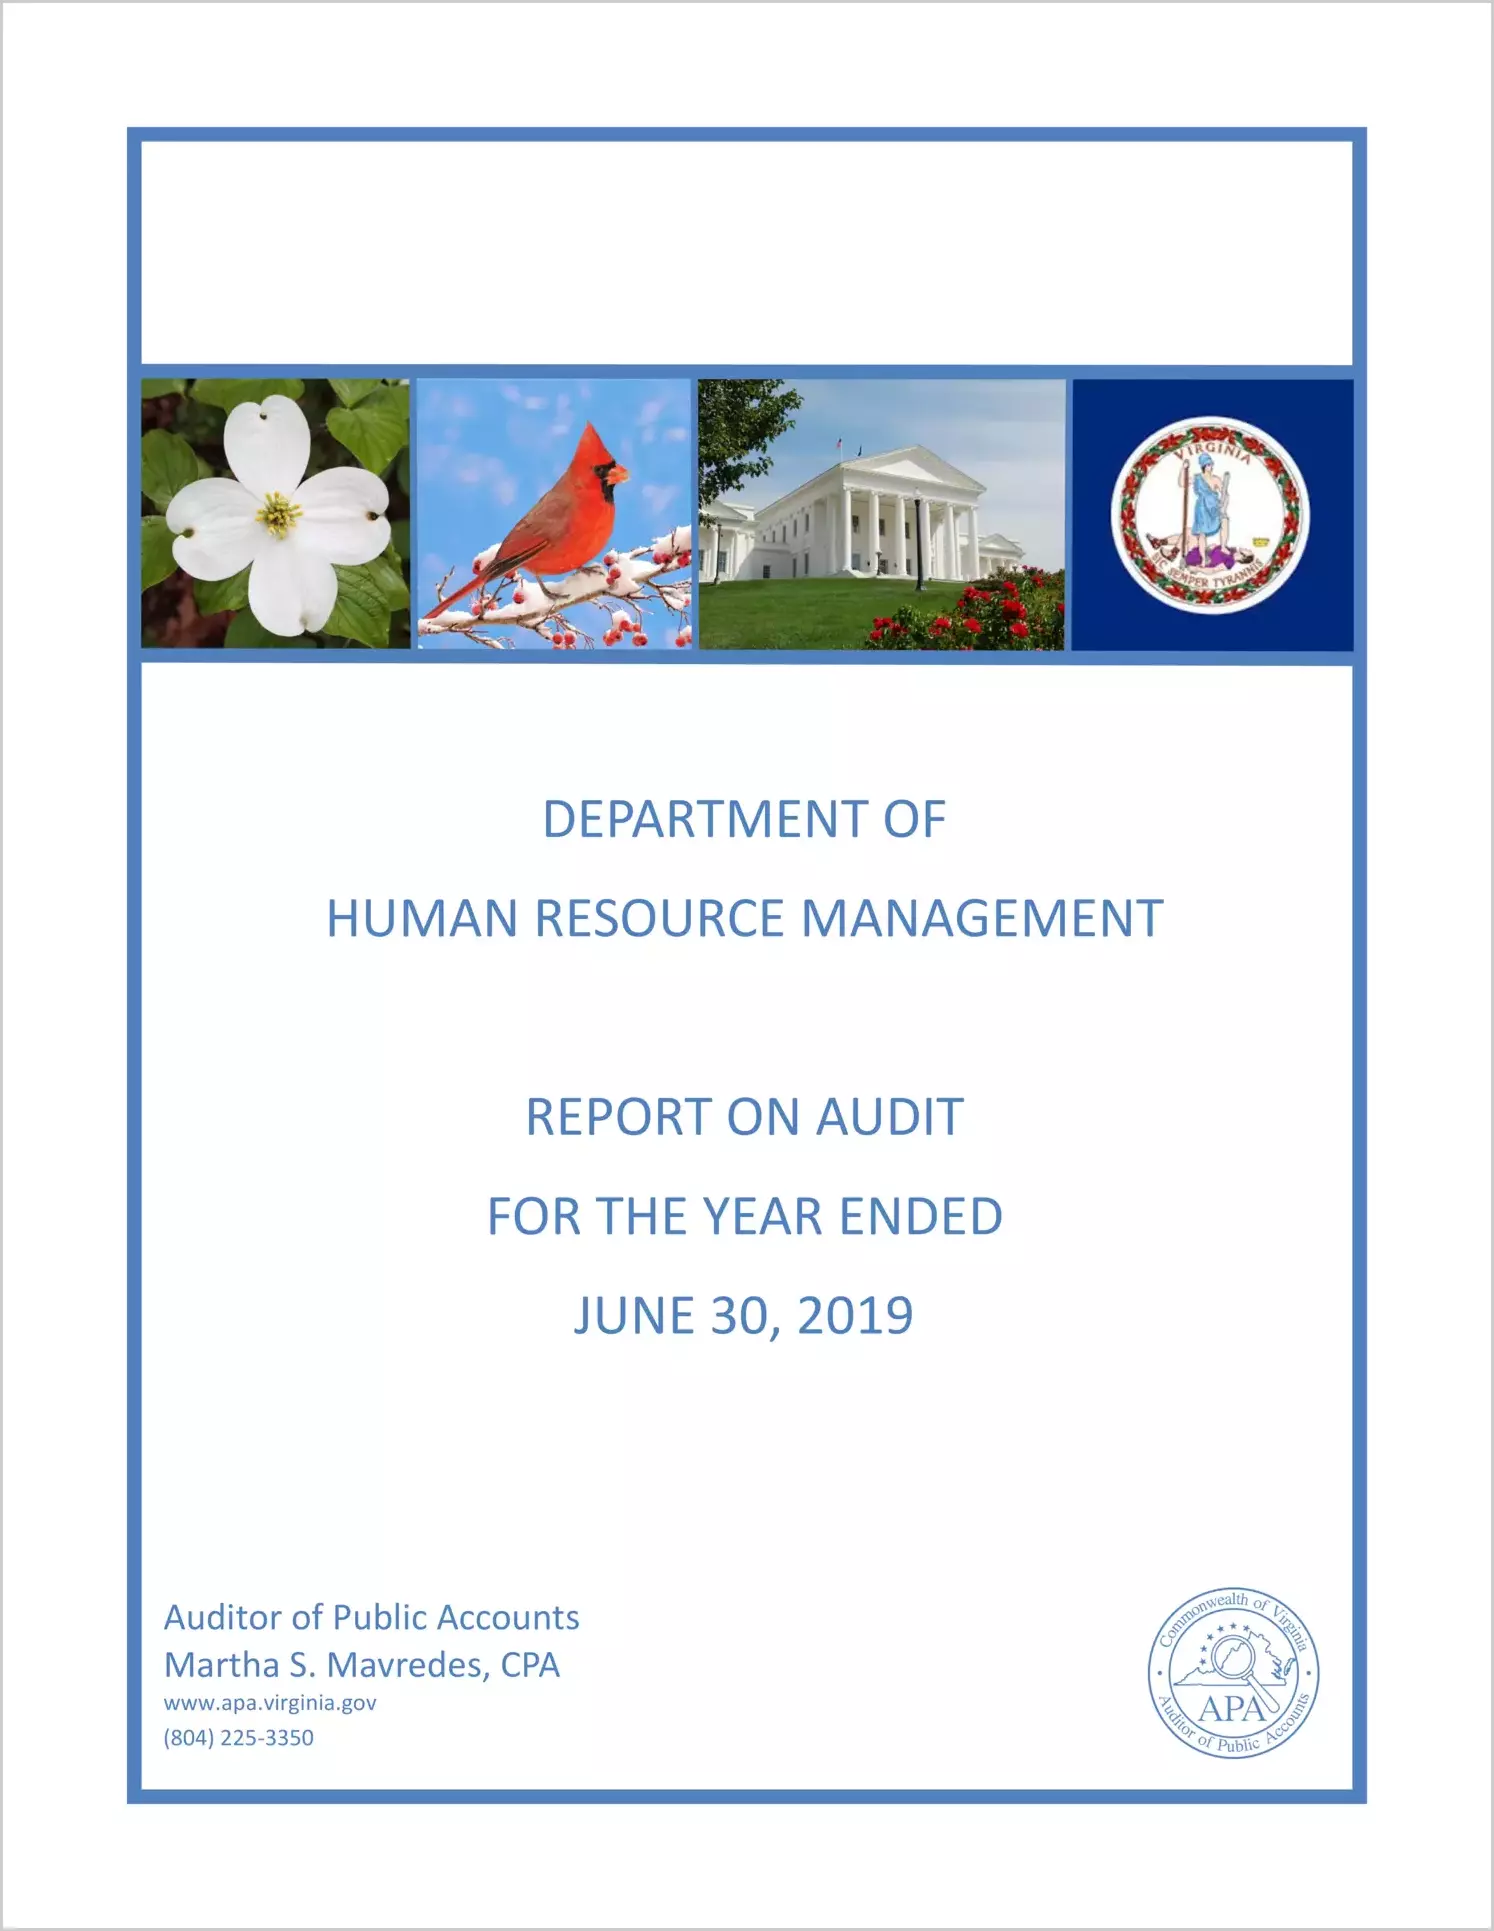 Department of Human Resource Management for the year ended June 30, 2019